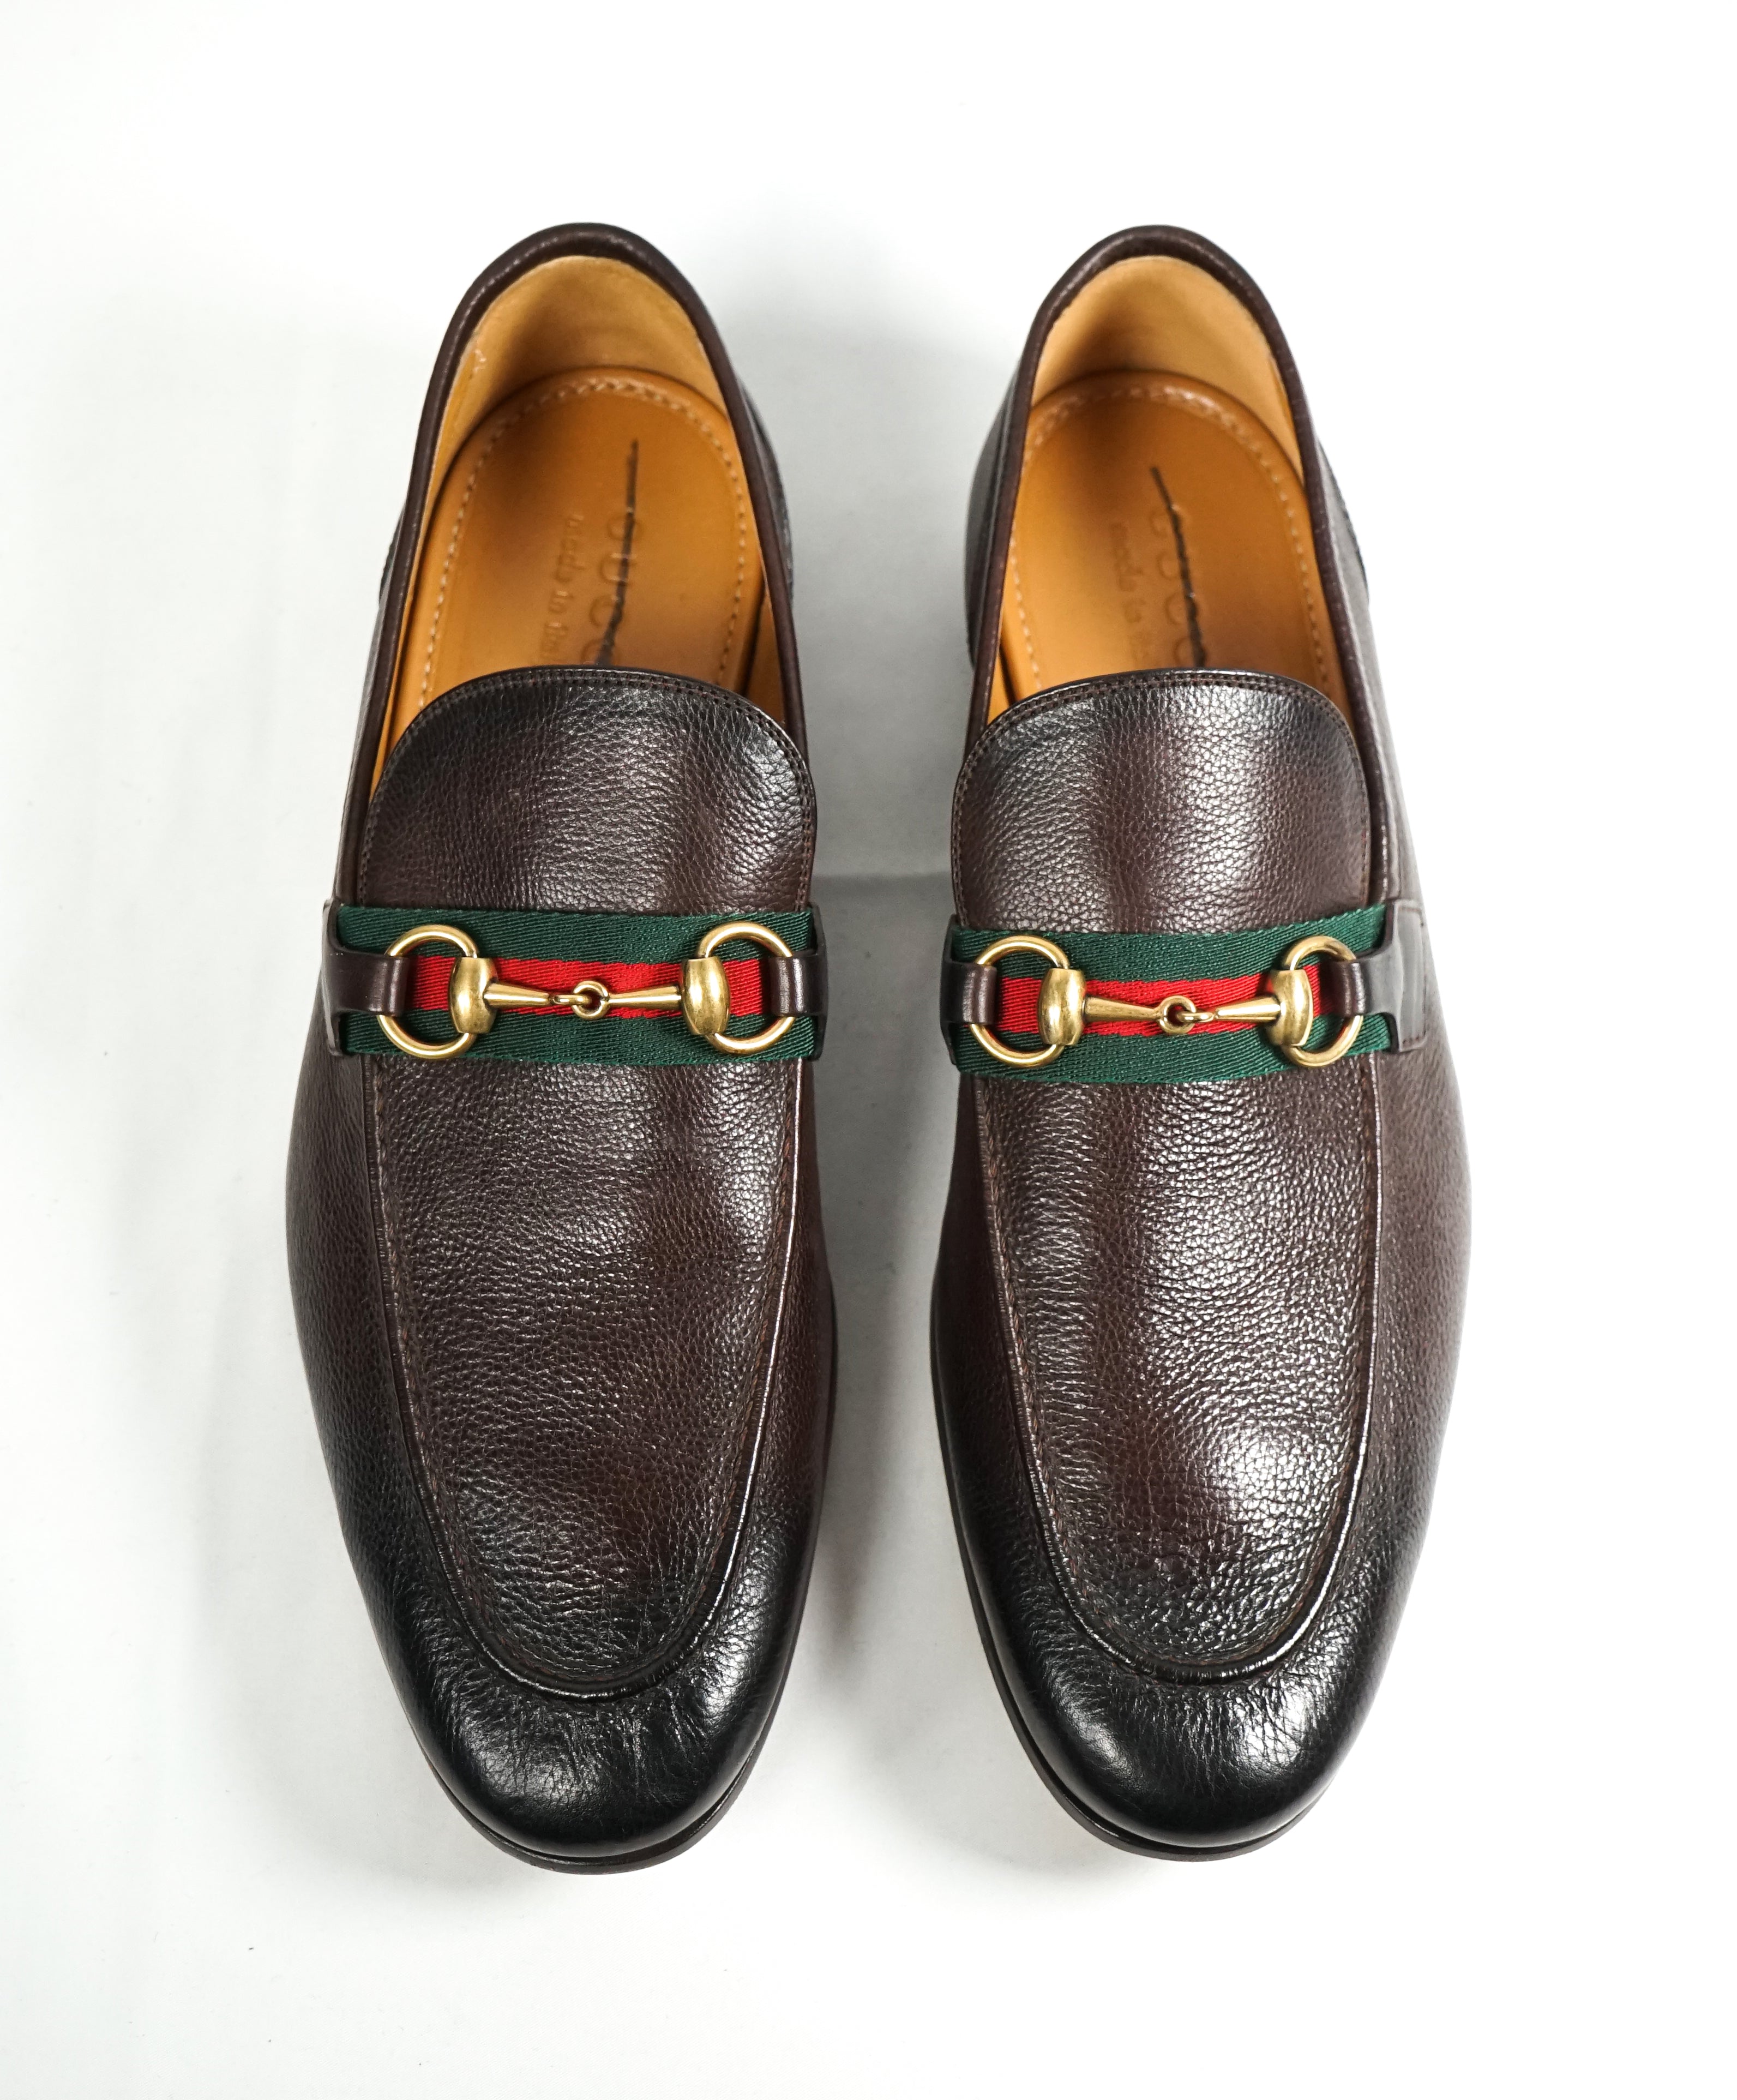 iconic loafers